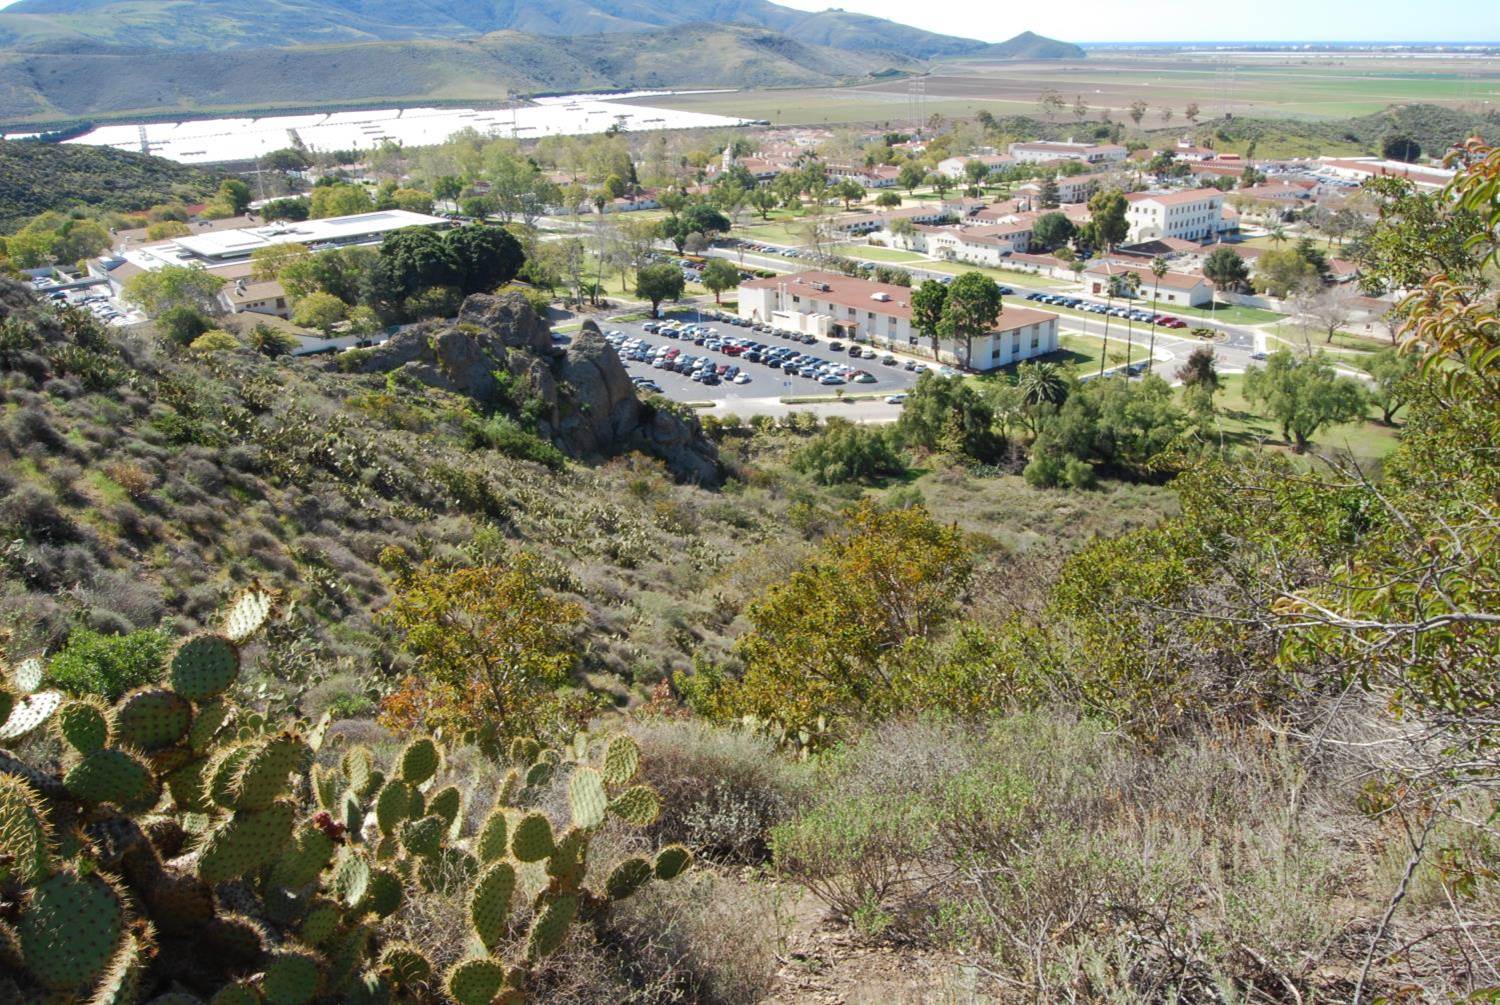 View from mountain with greenery and cactus on the bottom left with CSUCI buildings seen from a far